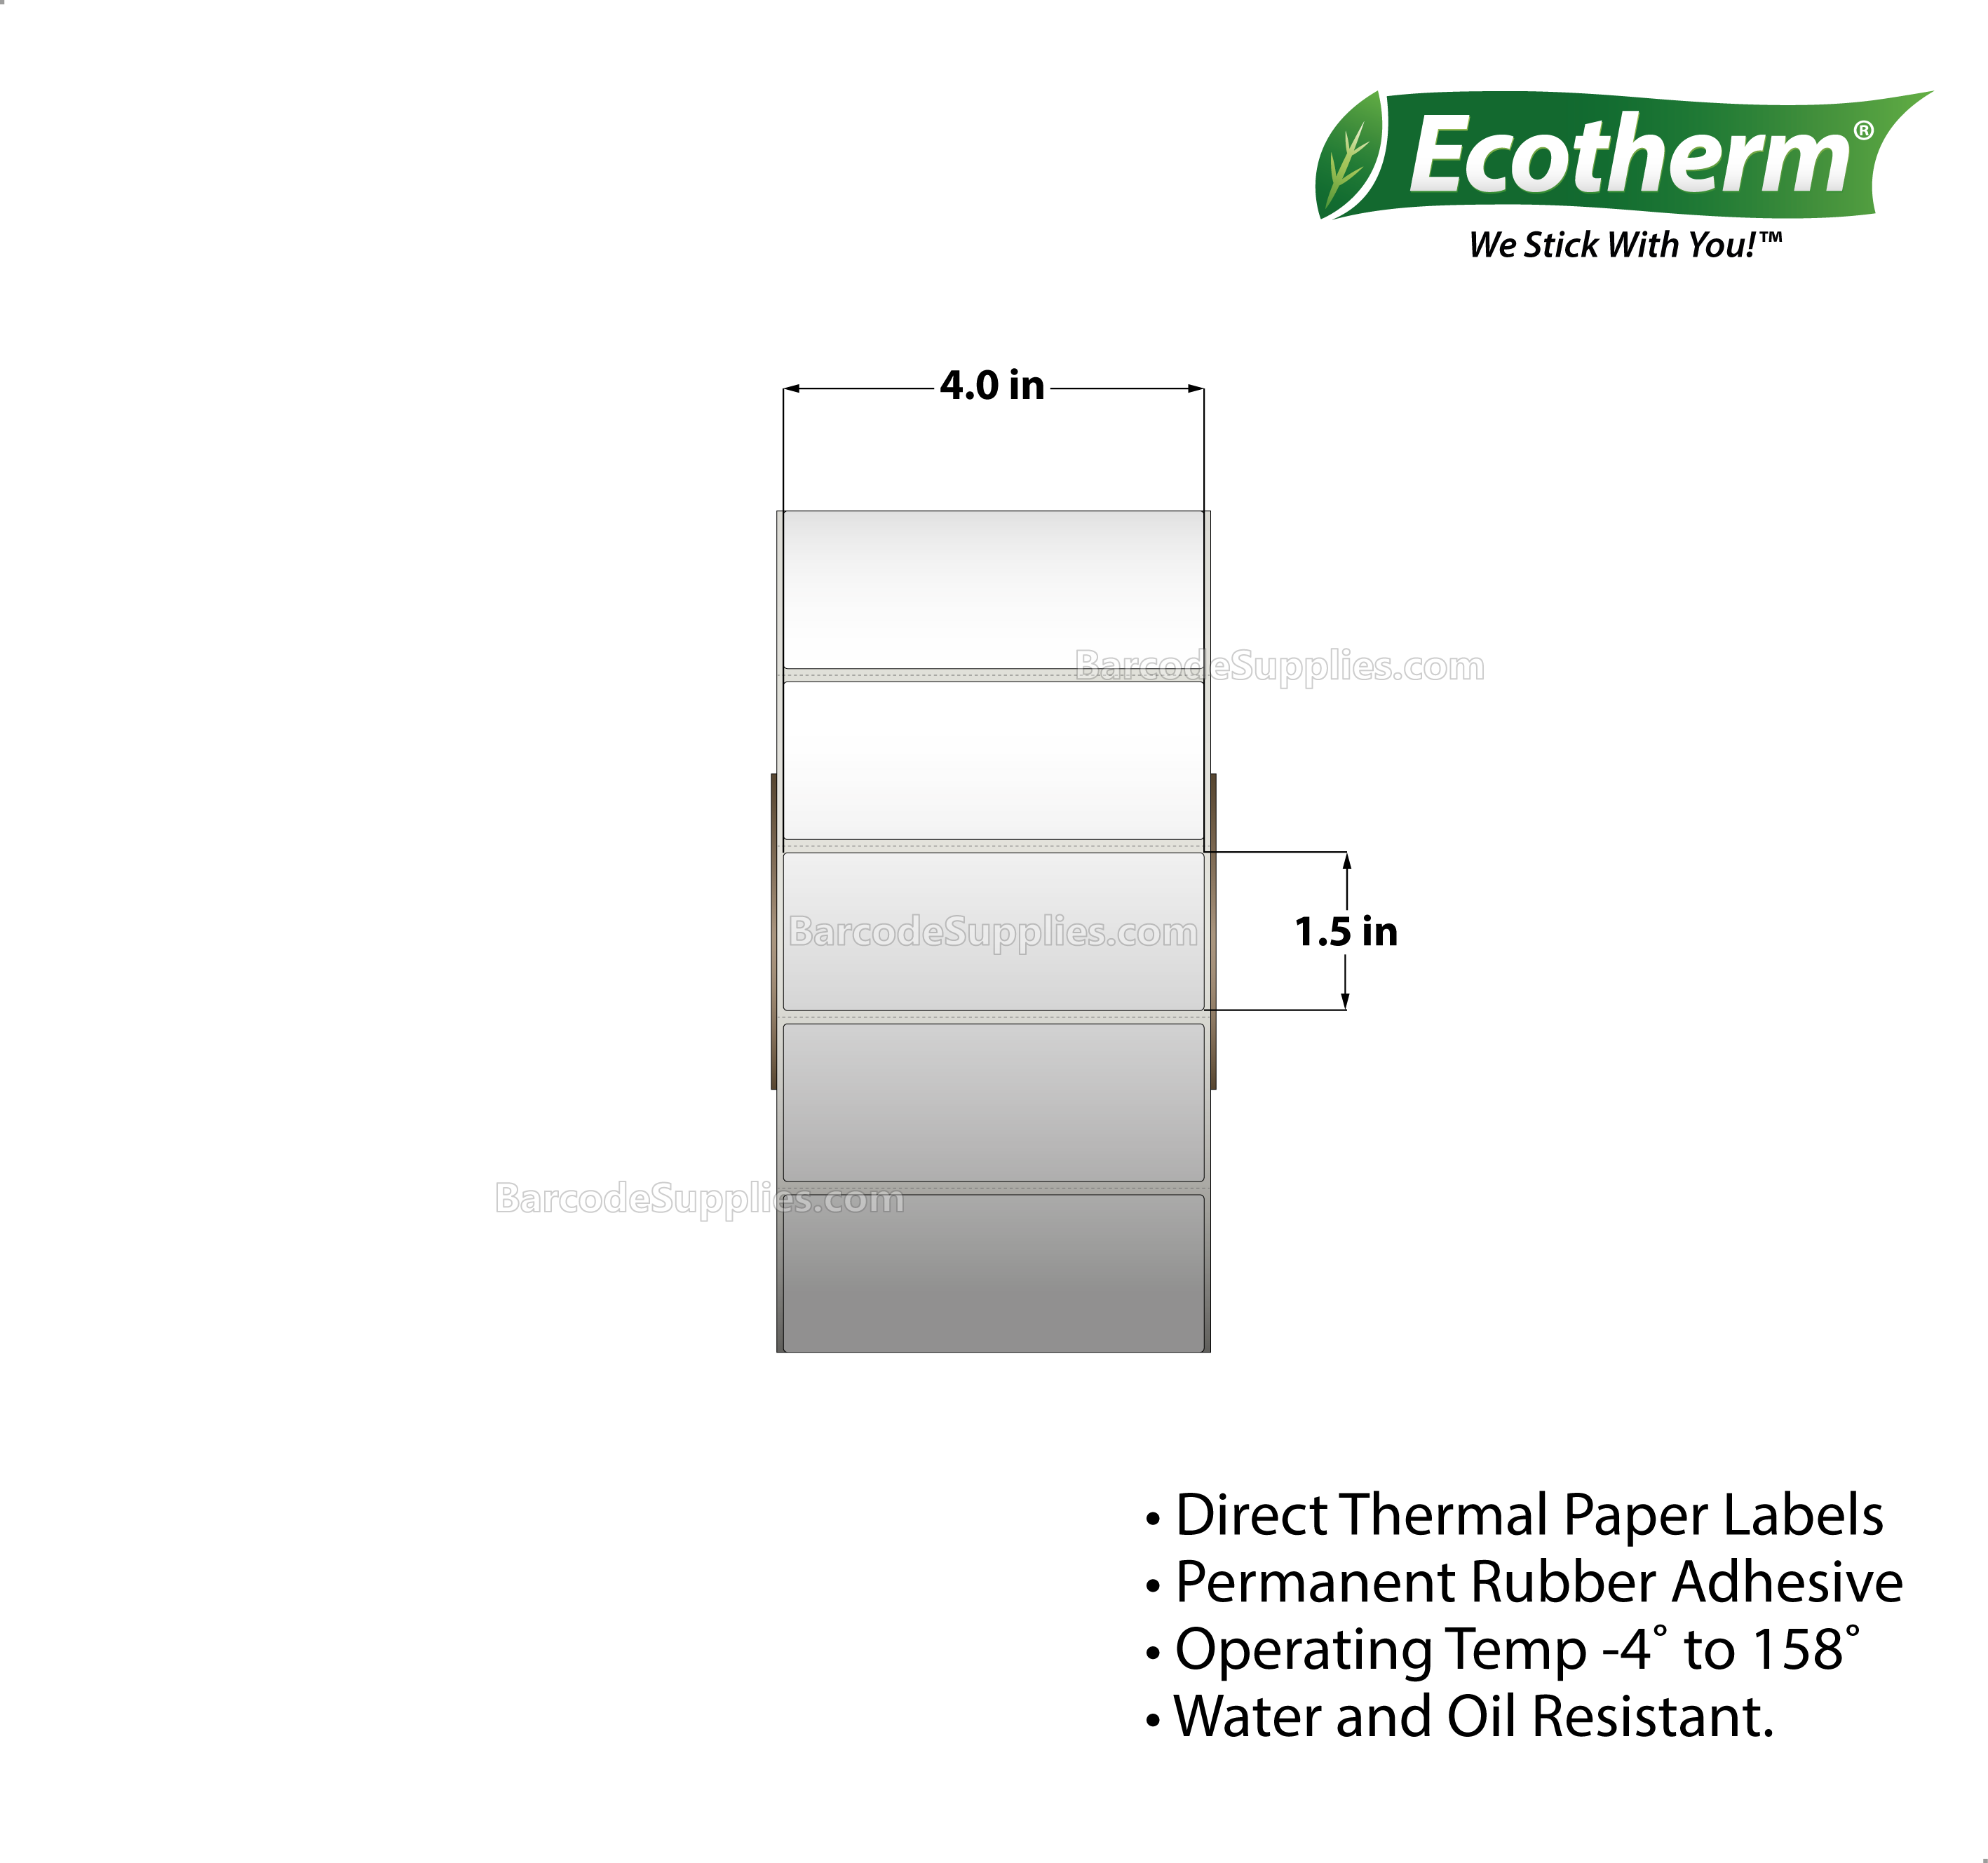 Products 4 x 1.5 Thermal Transfer White Labels With Rubber Adhesive - Perforated - 3850 Labels Per Roll - Carton Of 1 Rolls - 3850 Labels Total - MPN: ECOTHERM28135-1